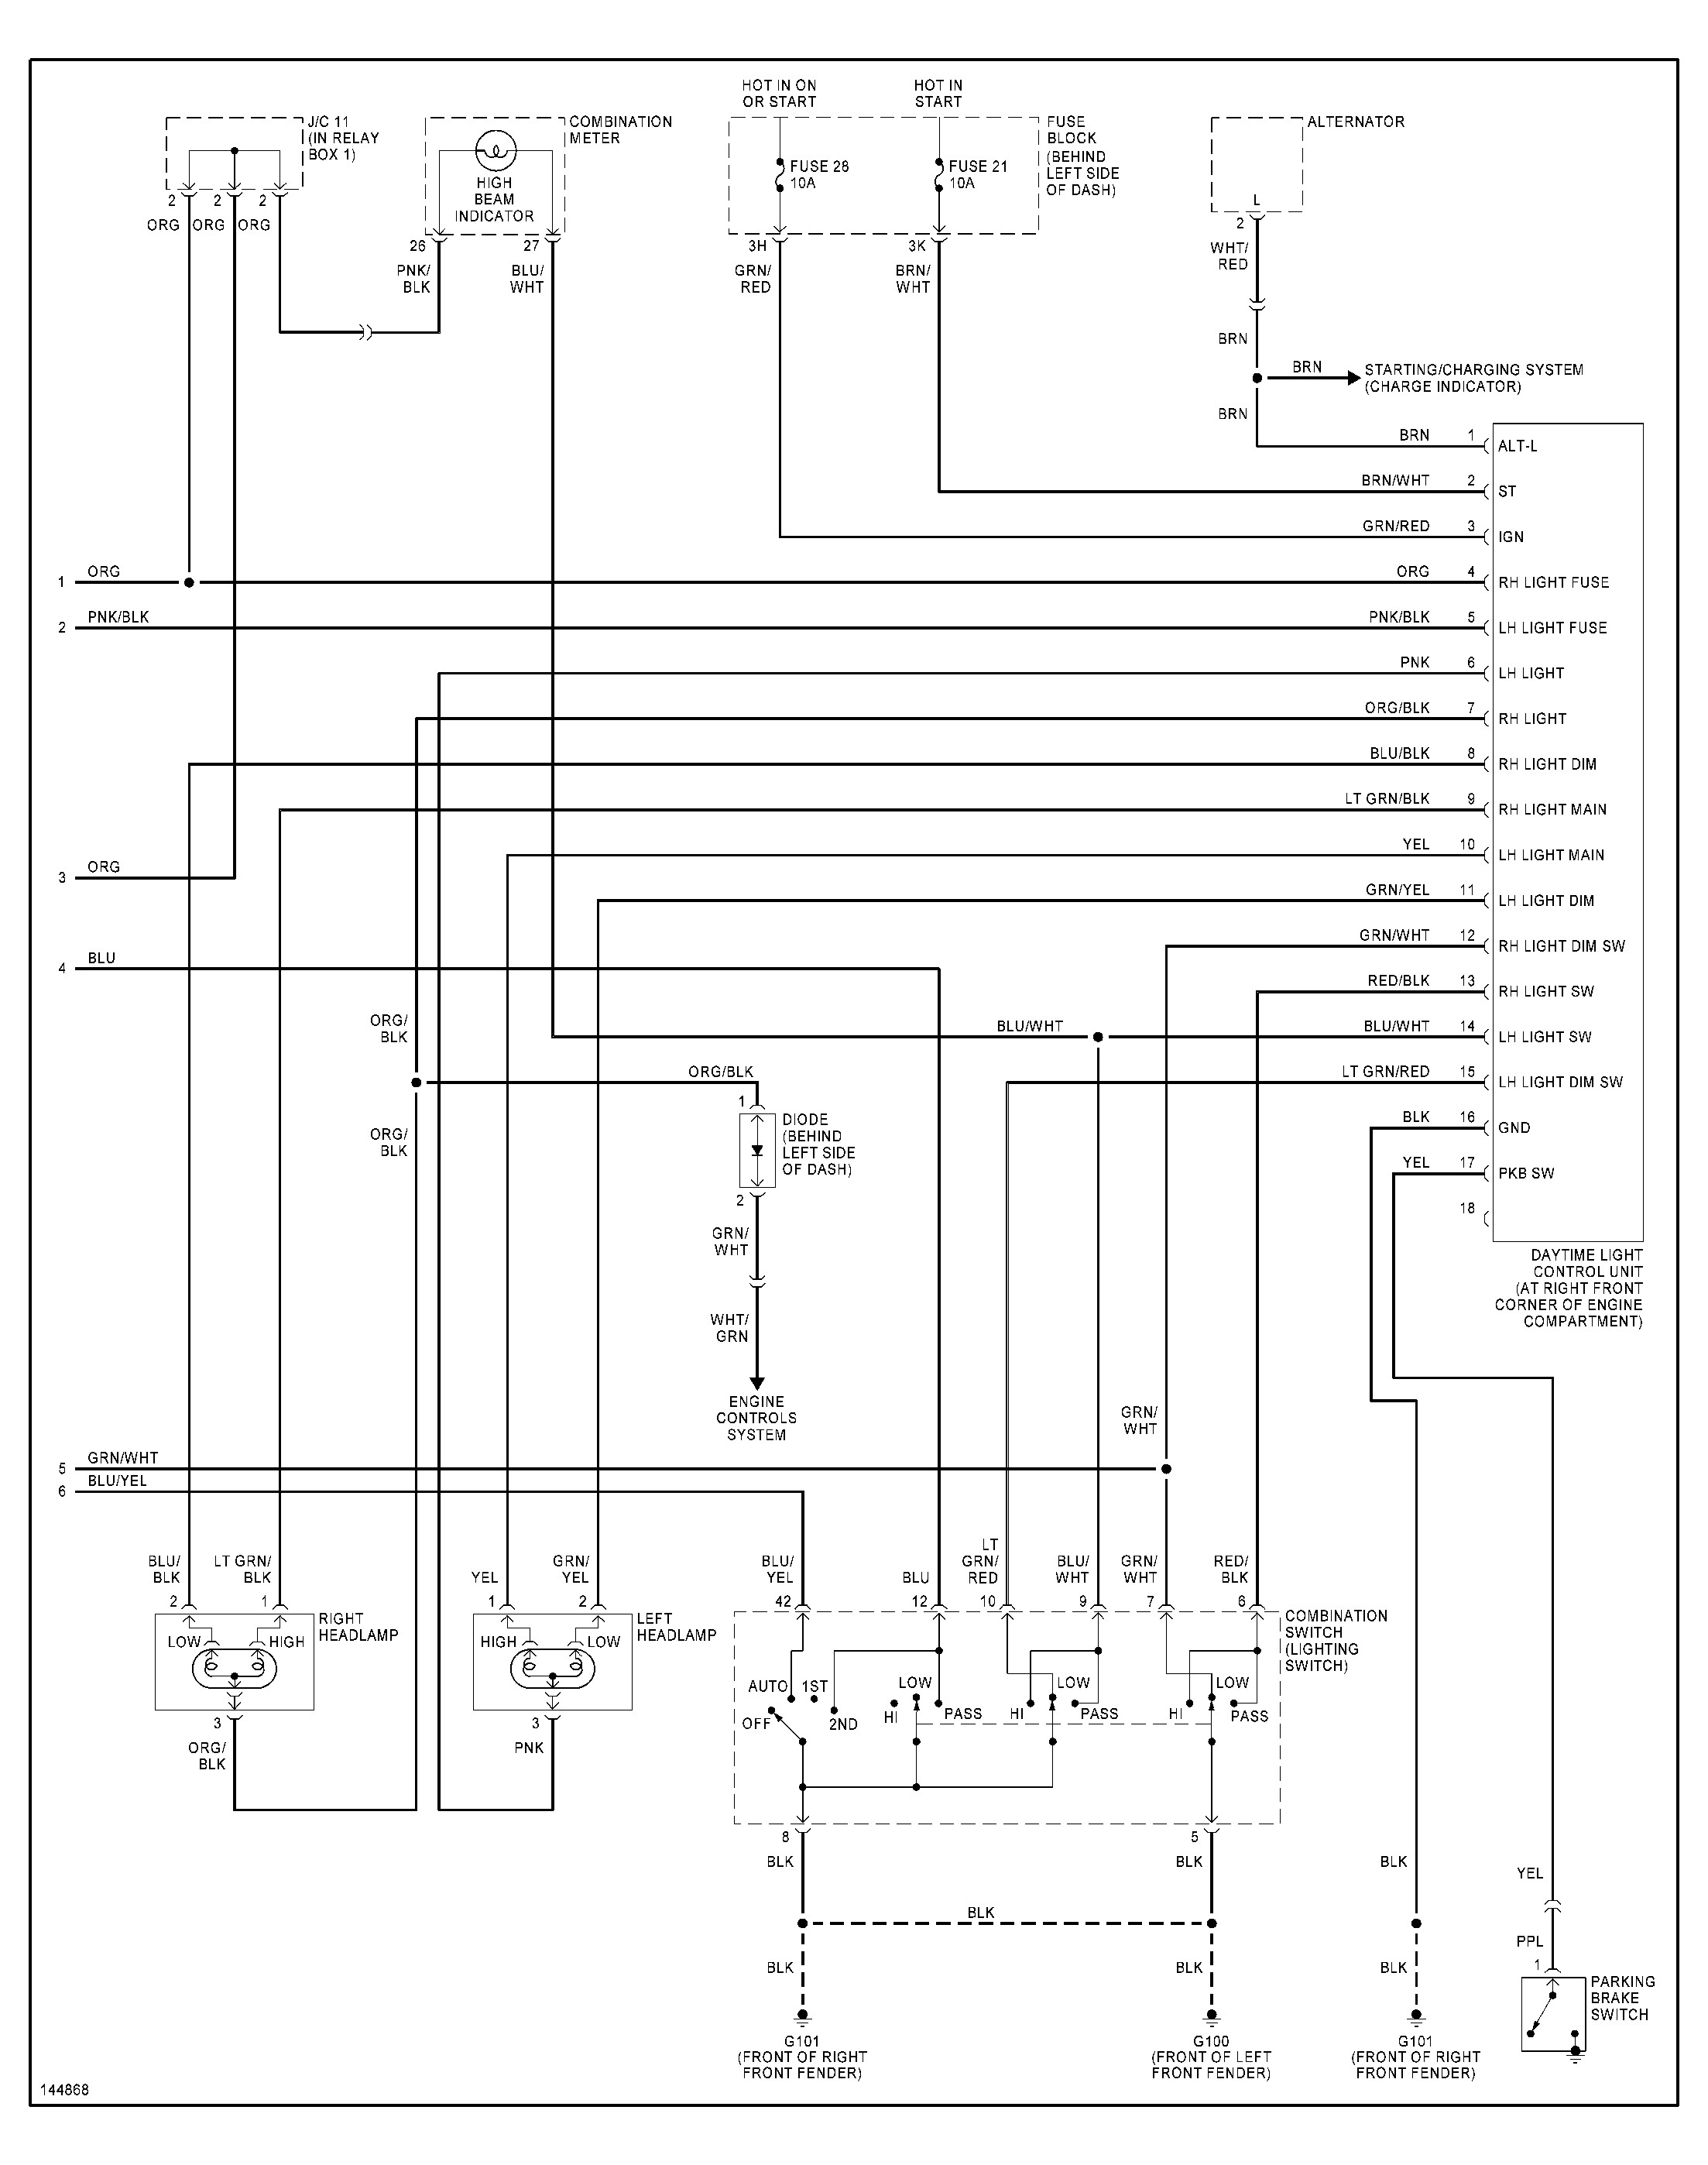 2004 Nissan Maxima Engine Diagram Nissan Maxima Radio Diagram Another Blog About Wiring Diagram • Of 2004 Nissan Maxima Engine Diagram